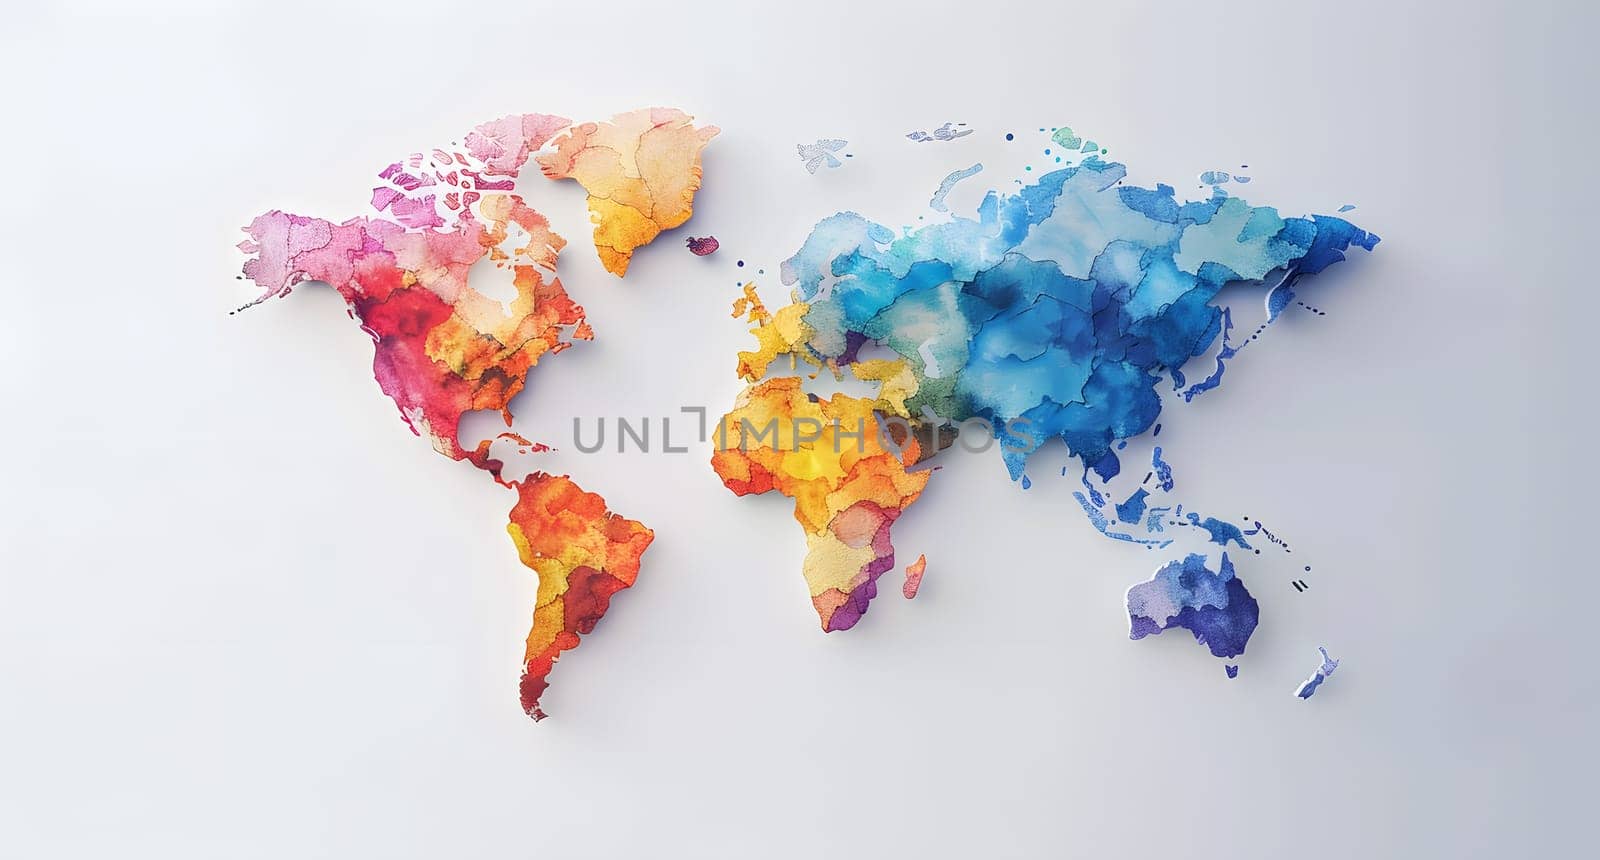 a colorful map of the world on a white background by Nadtochiy